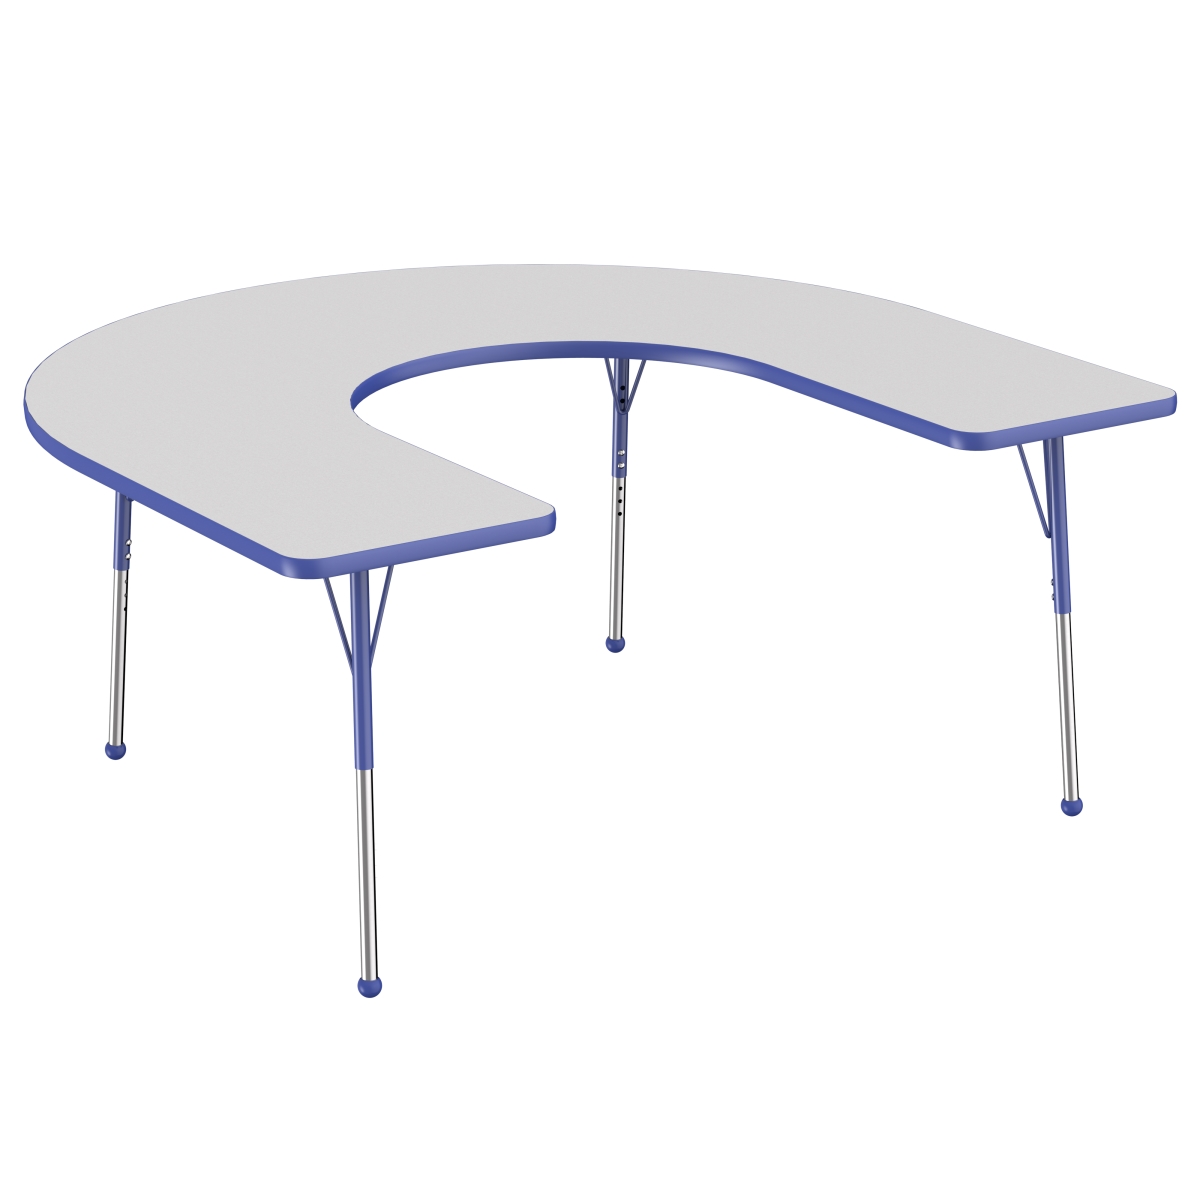 10094-gybl 60 X 66 In. Horseshoe T-mold Adjustable Activity Table With Standard Ball - Grey & Blue